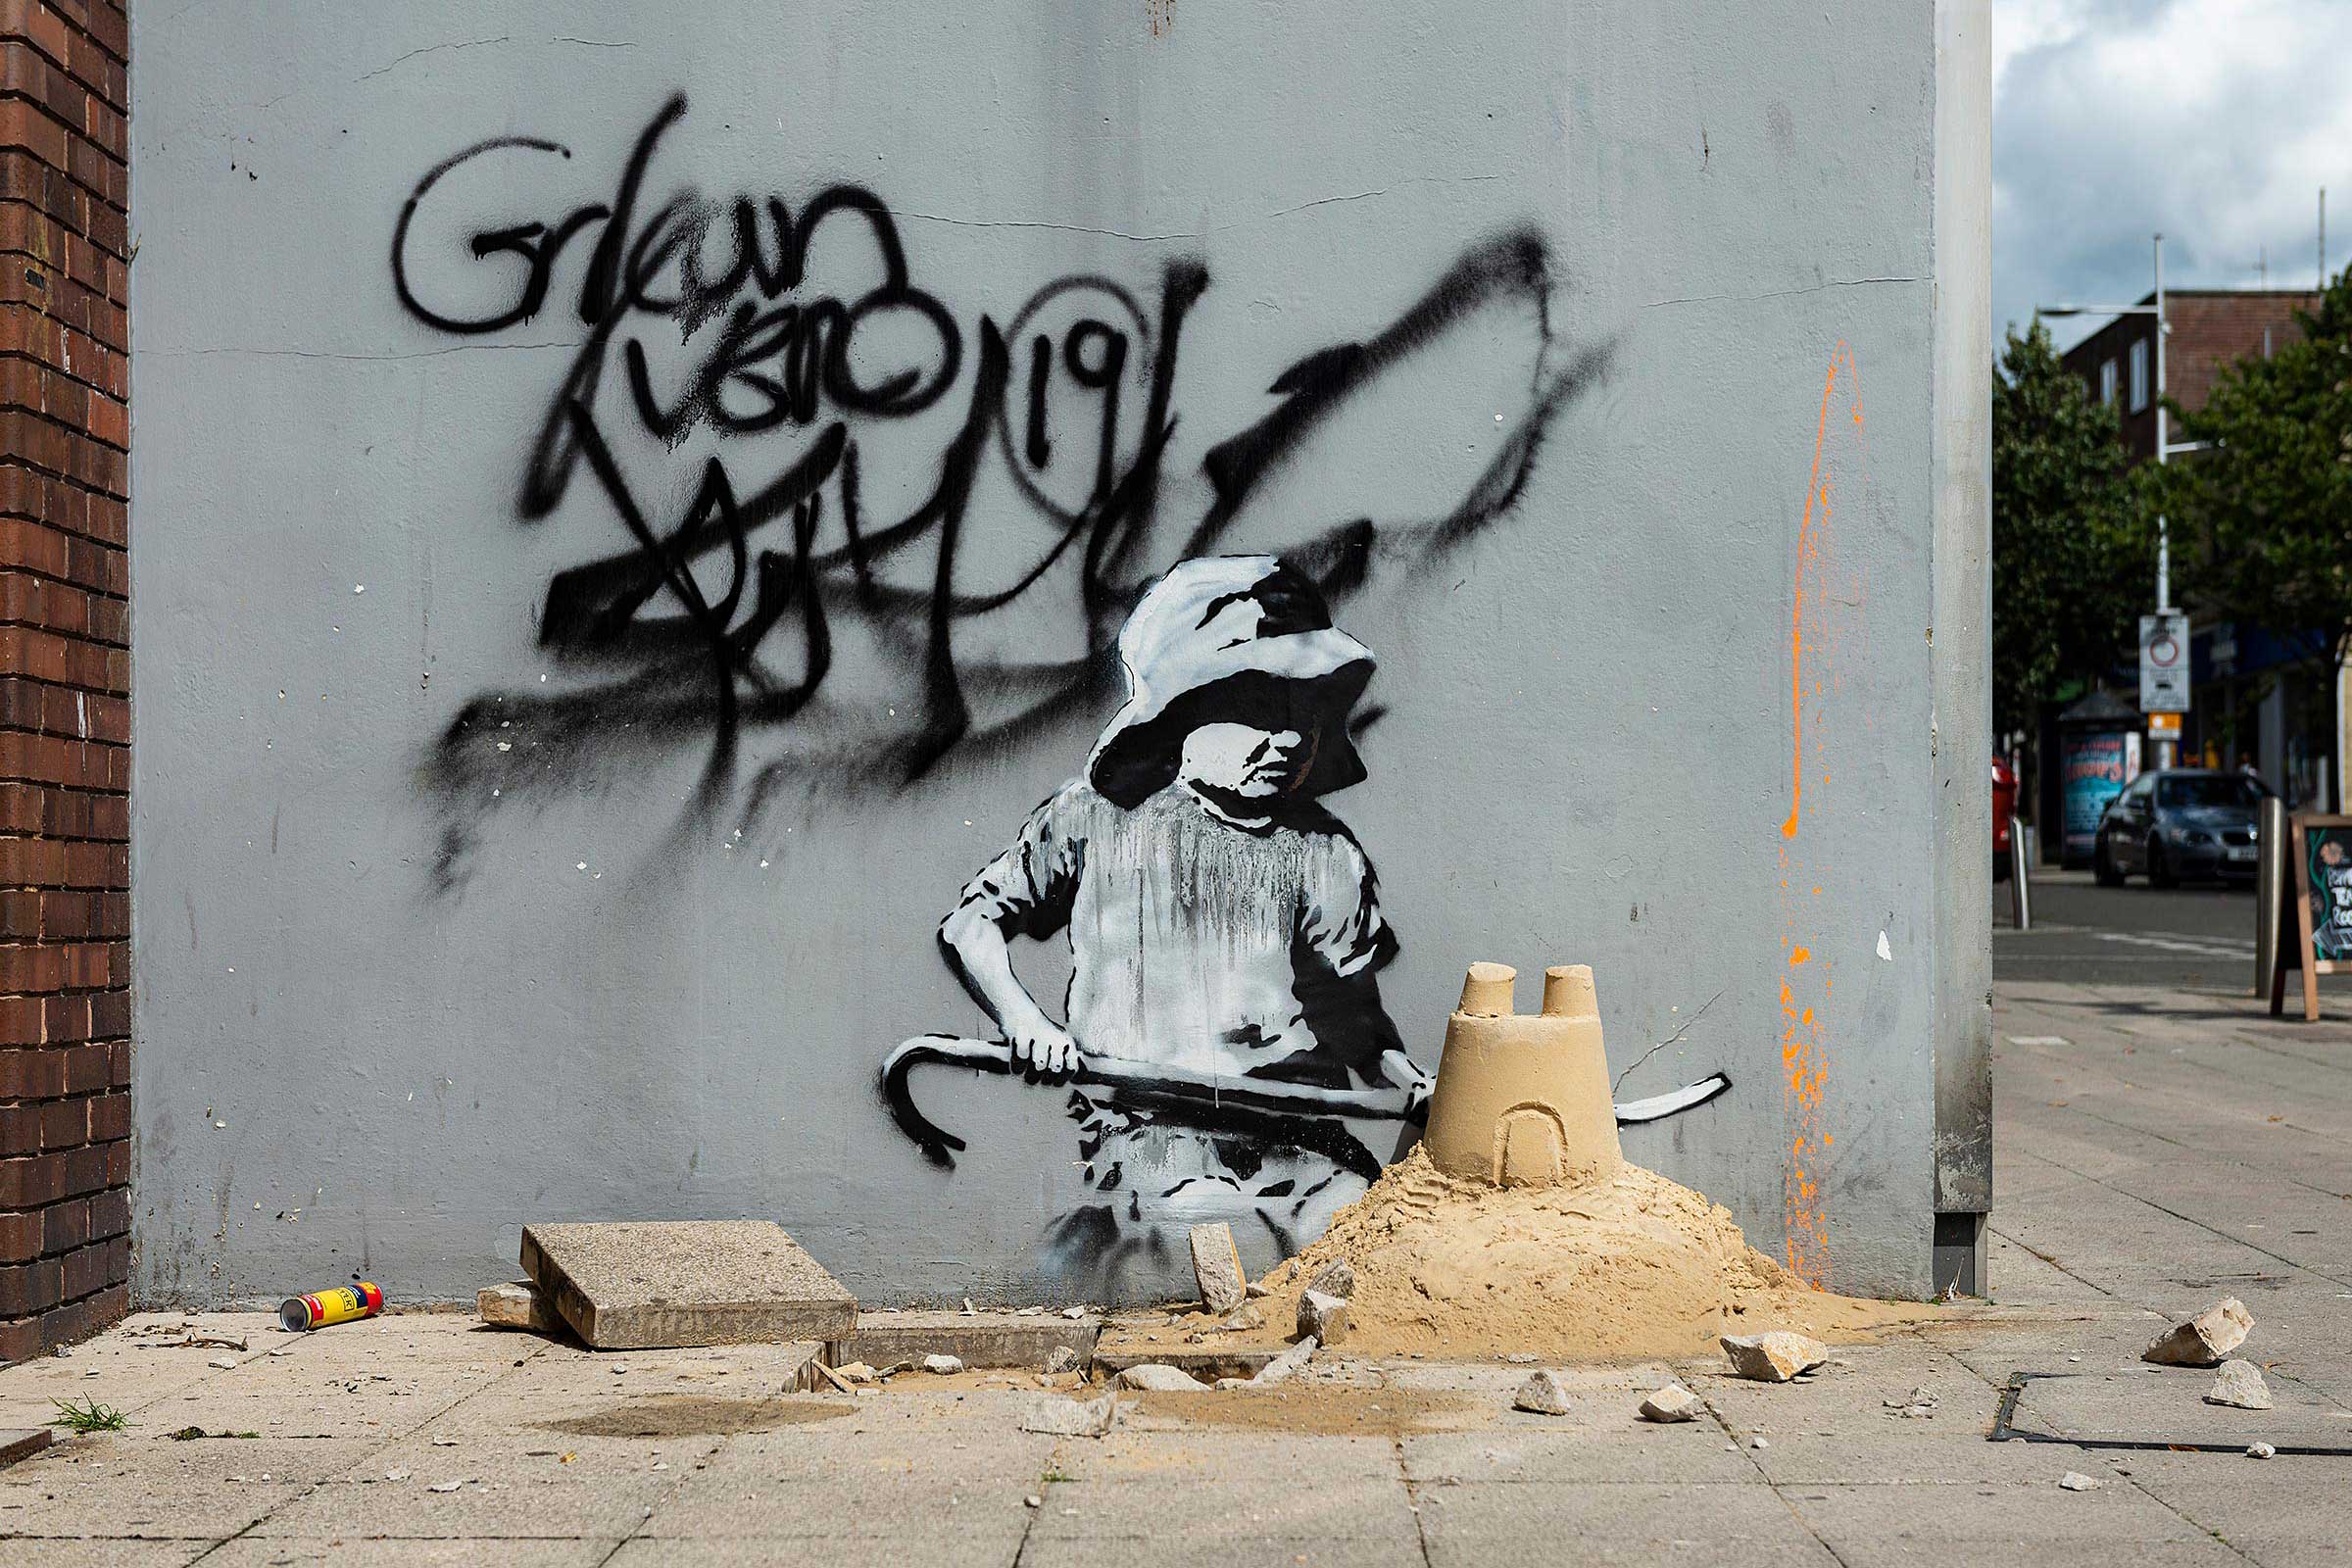 How a Banksy seagull mural became a 'living nightmare